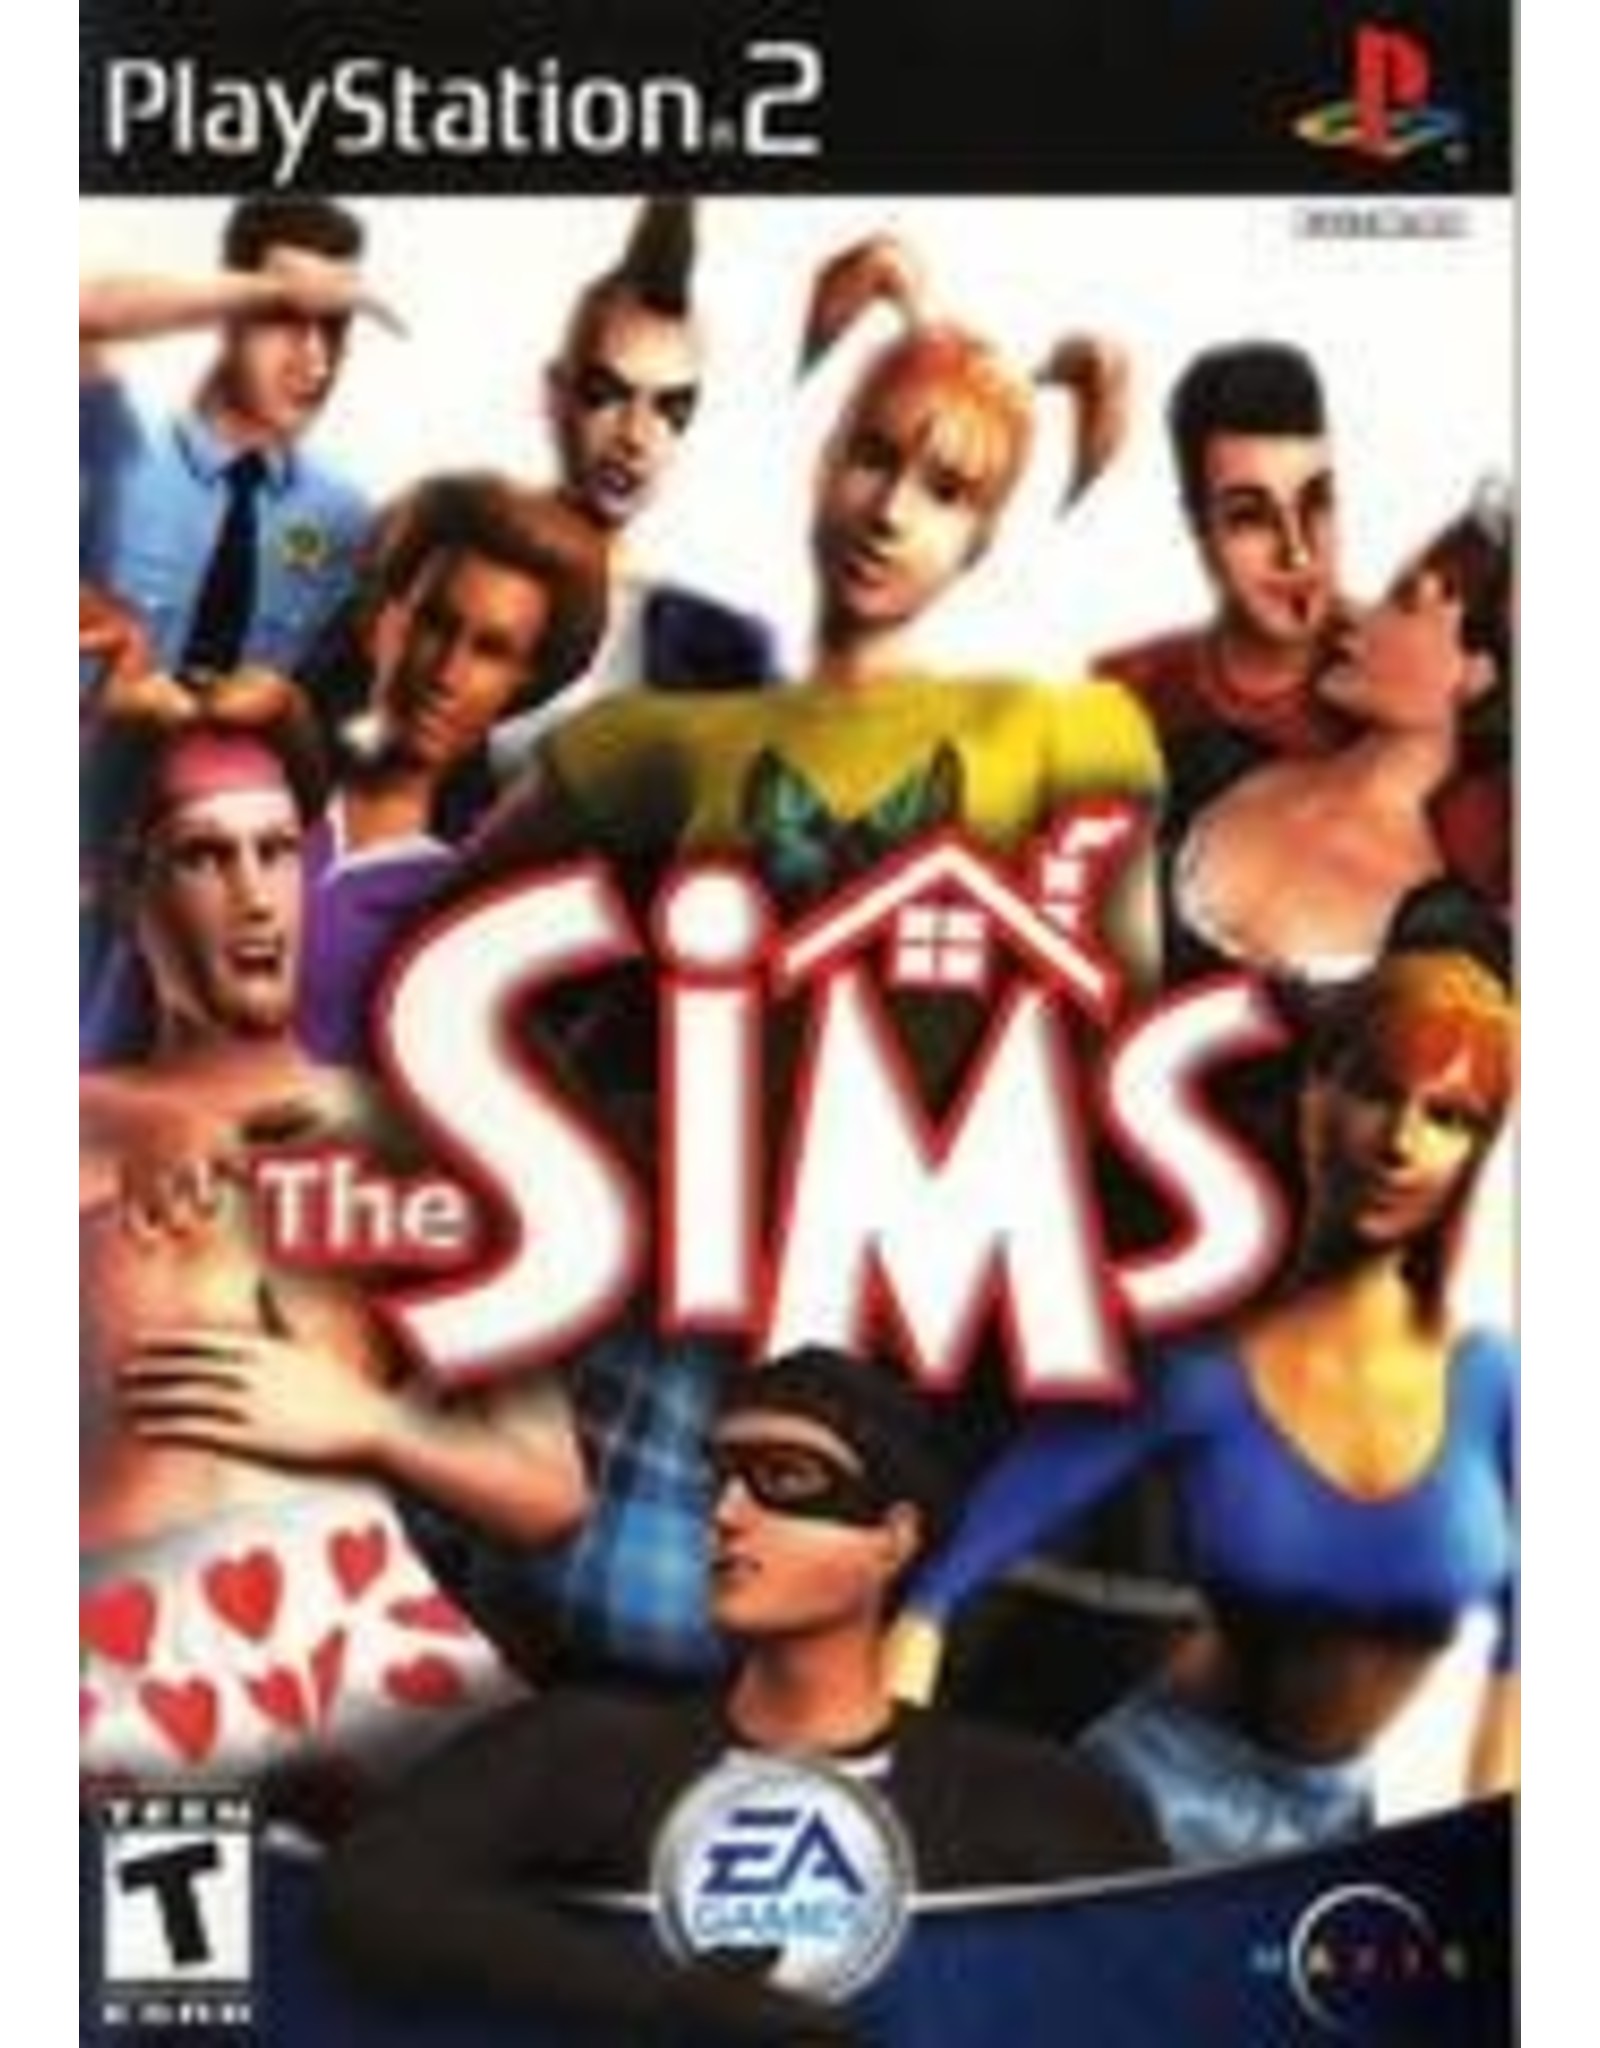 Playstation 2 Sims, The (Used)